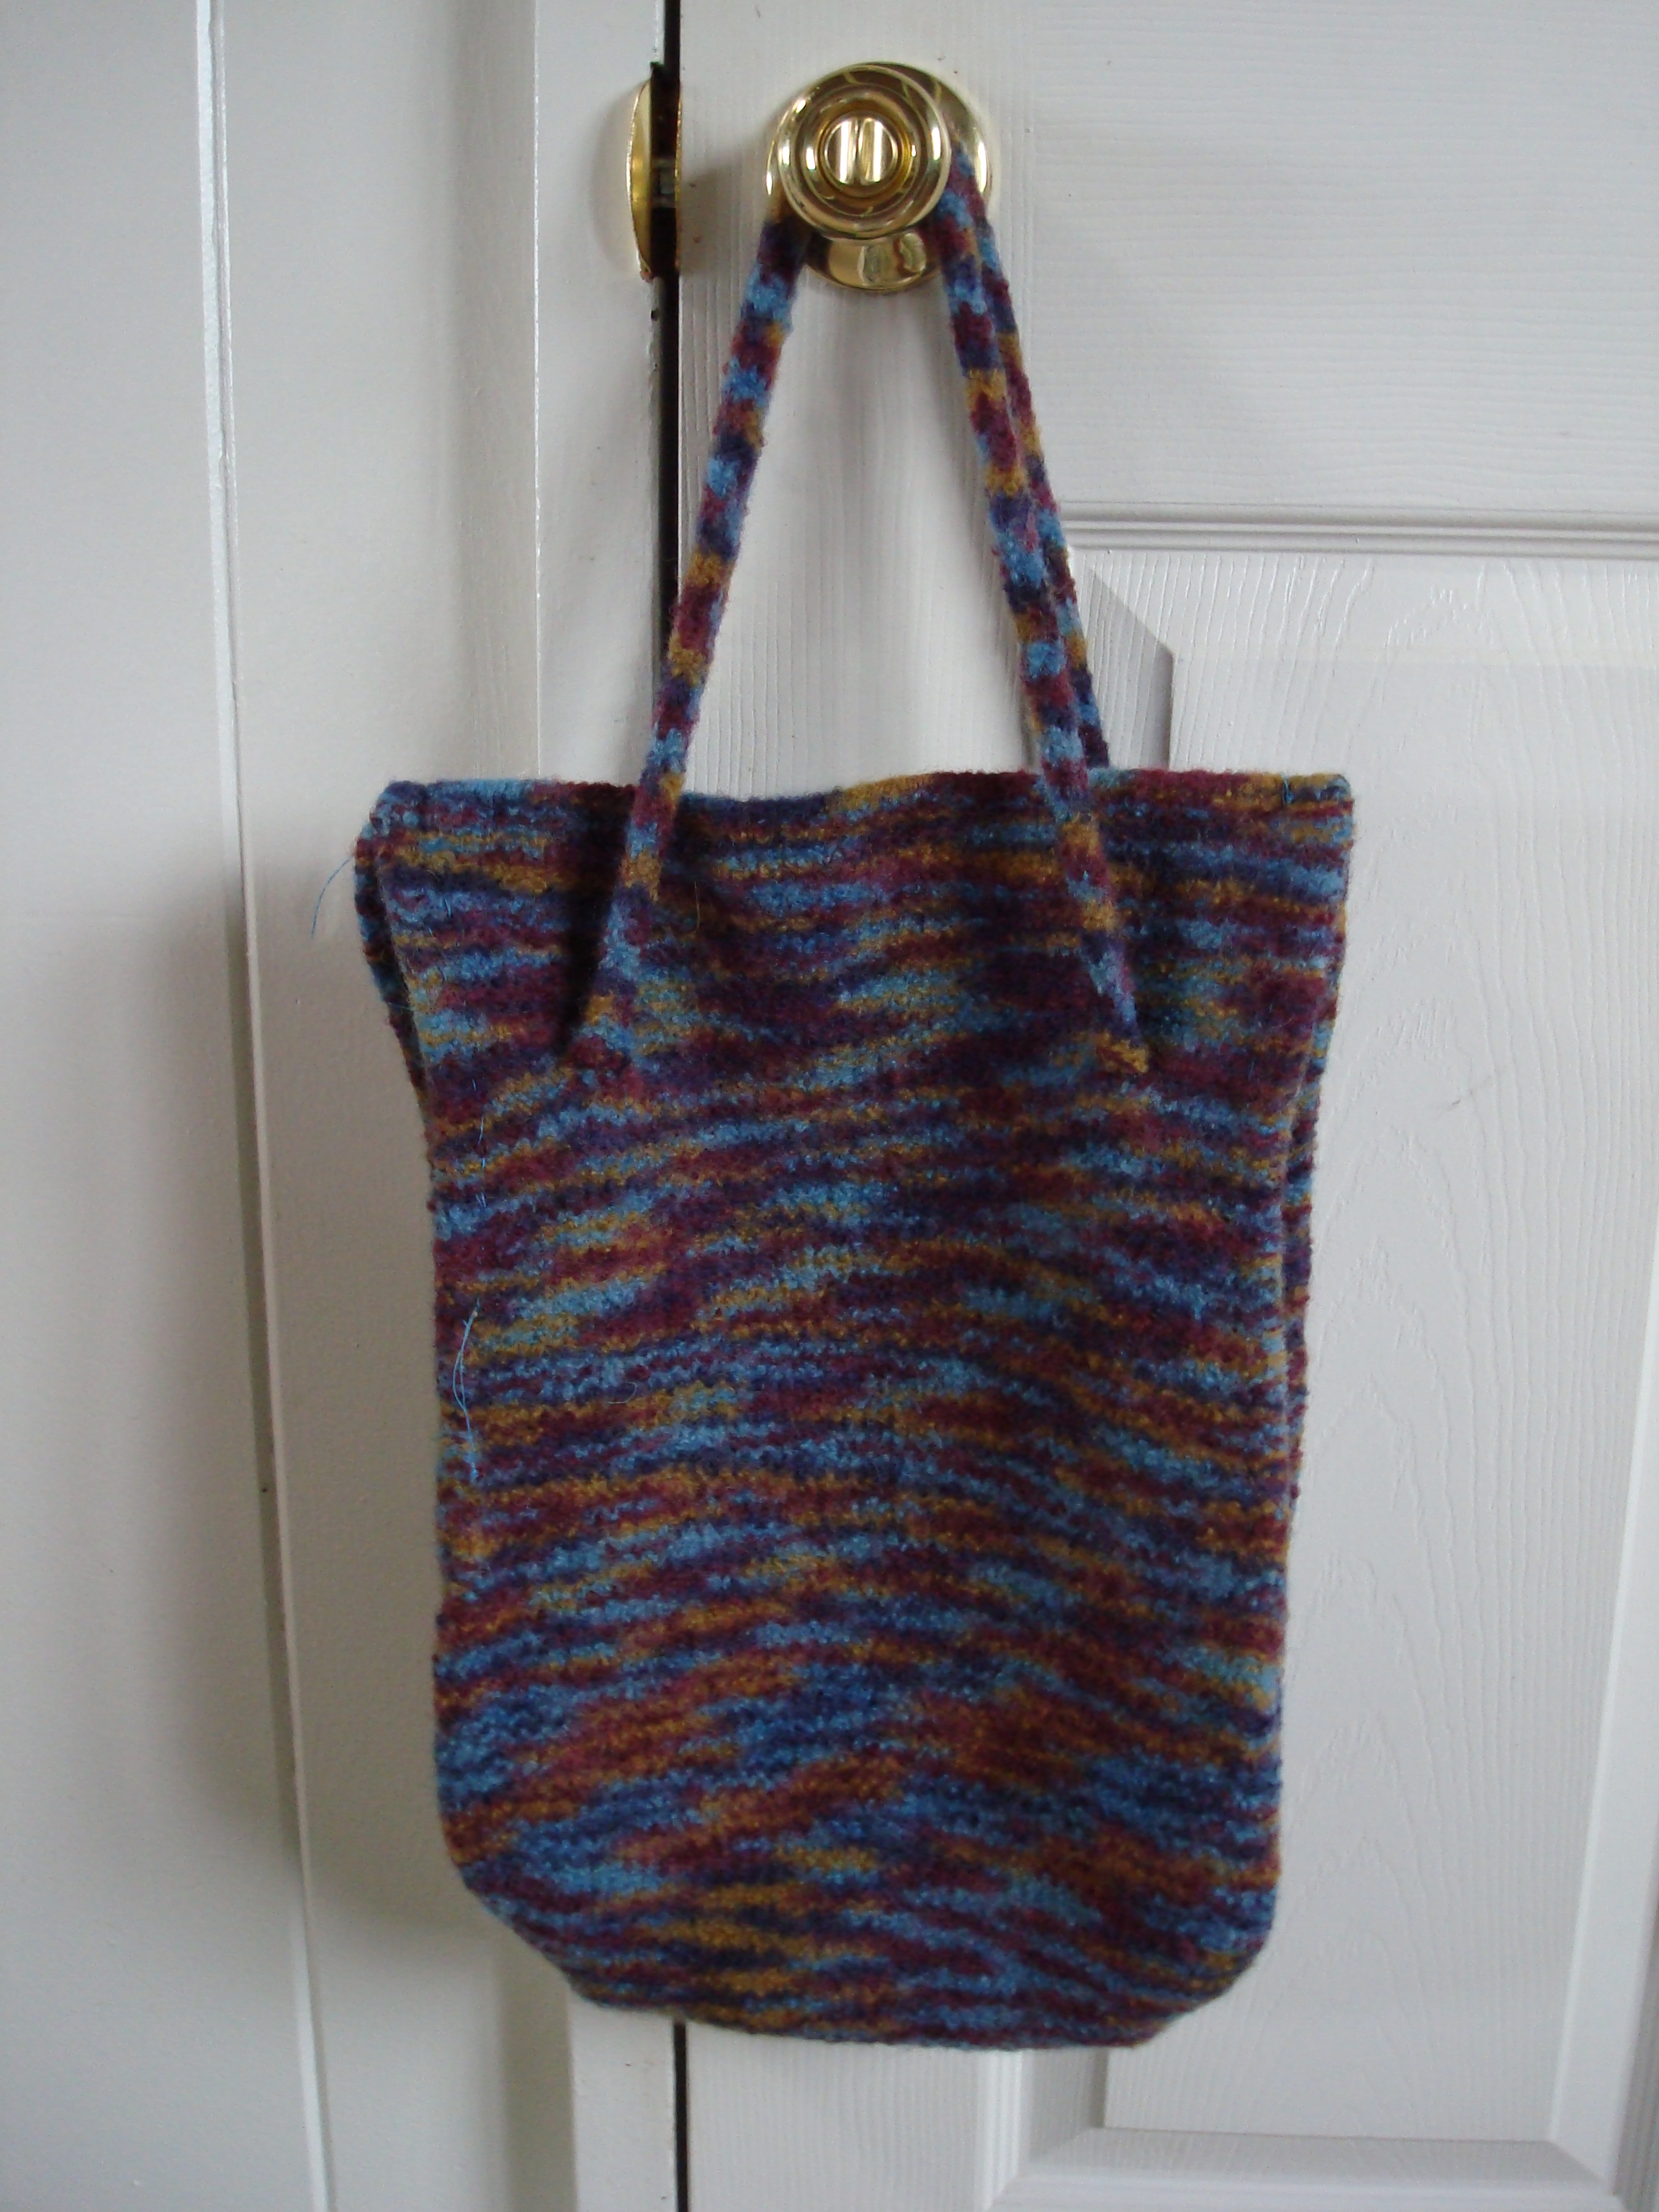 felted purse